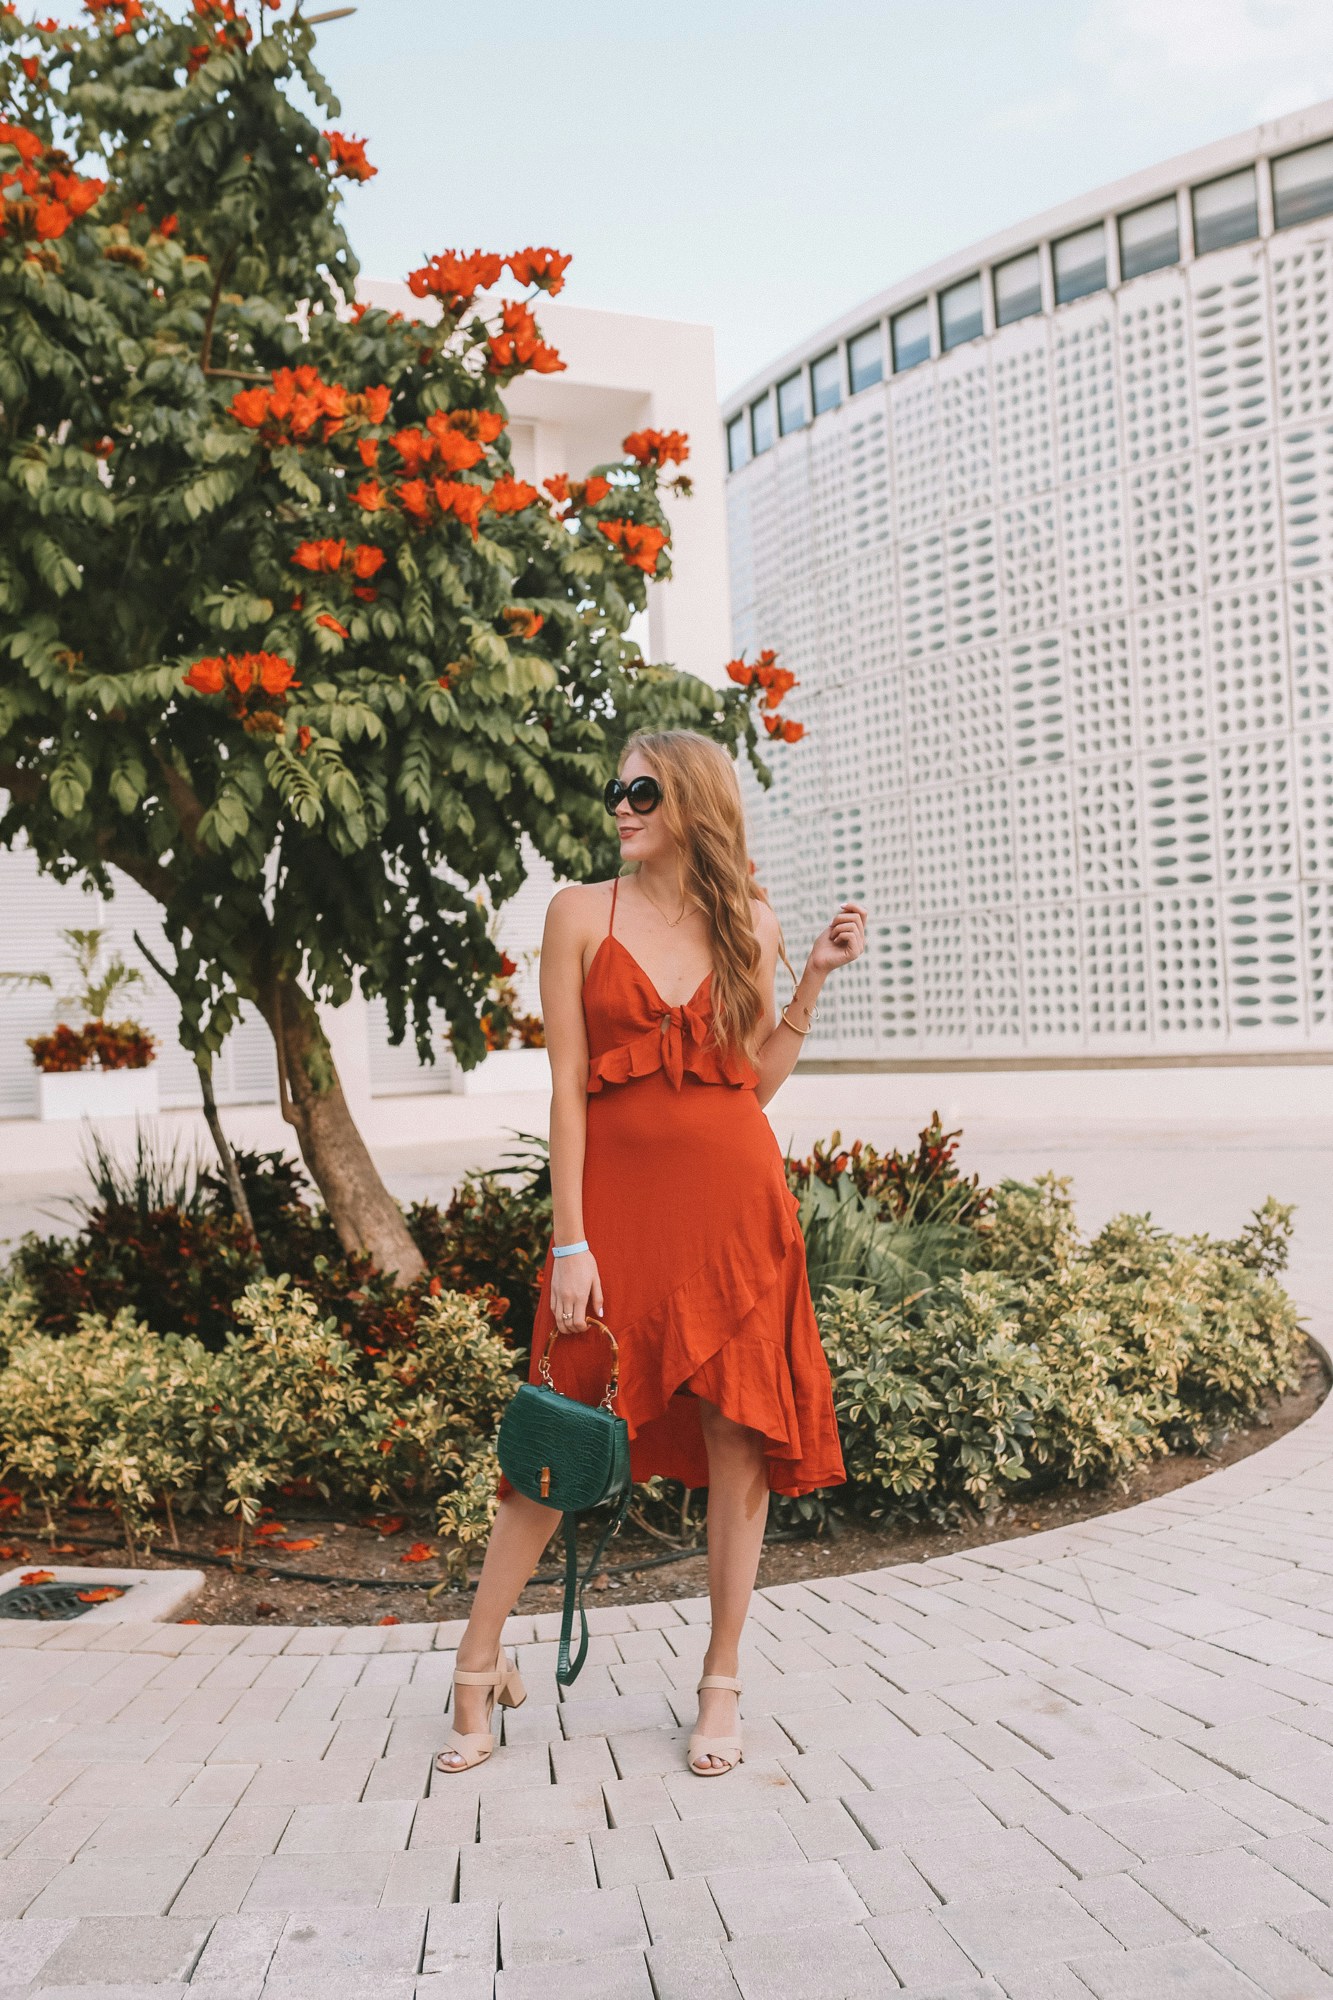 Orange linen spaghetti strap dress from Forever 21 paired with dainty gold jewelry. I love wearing a simple dress and fresh, natural makeup for a resort wear look.